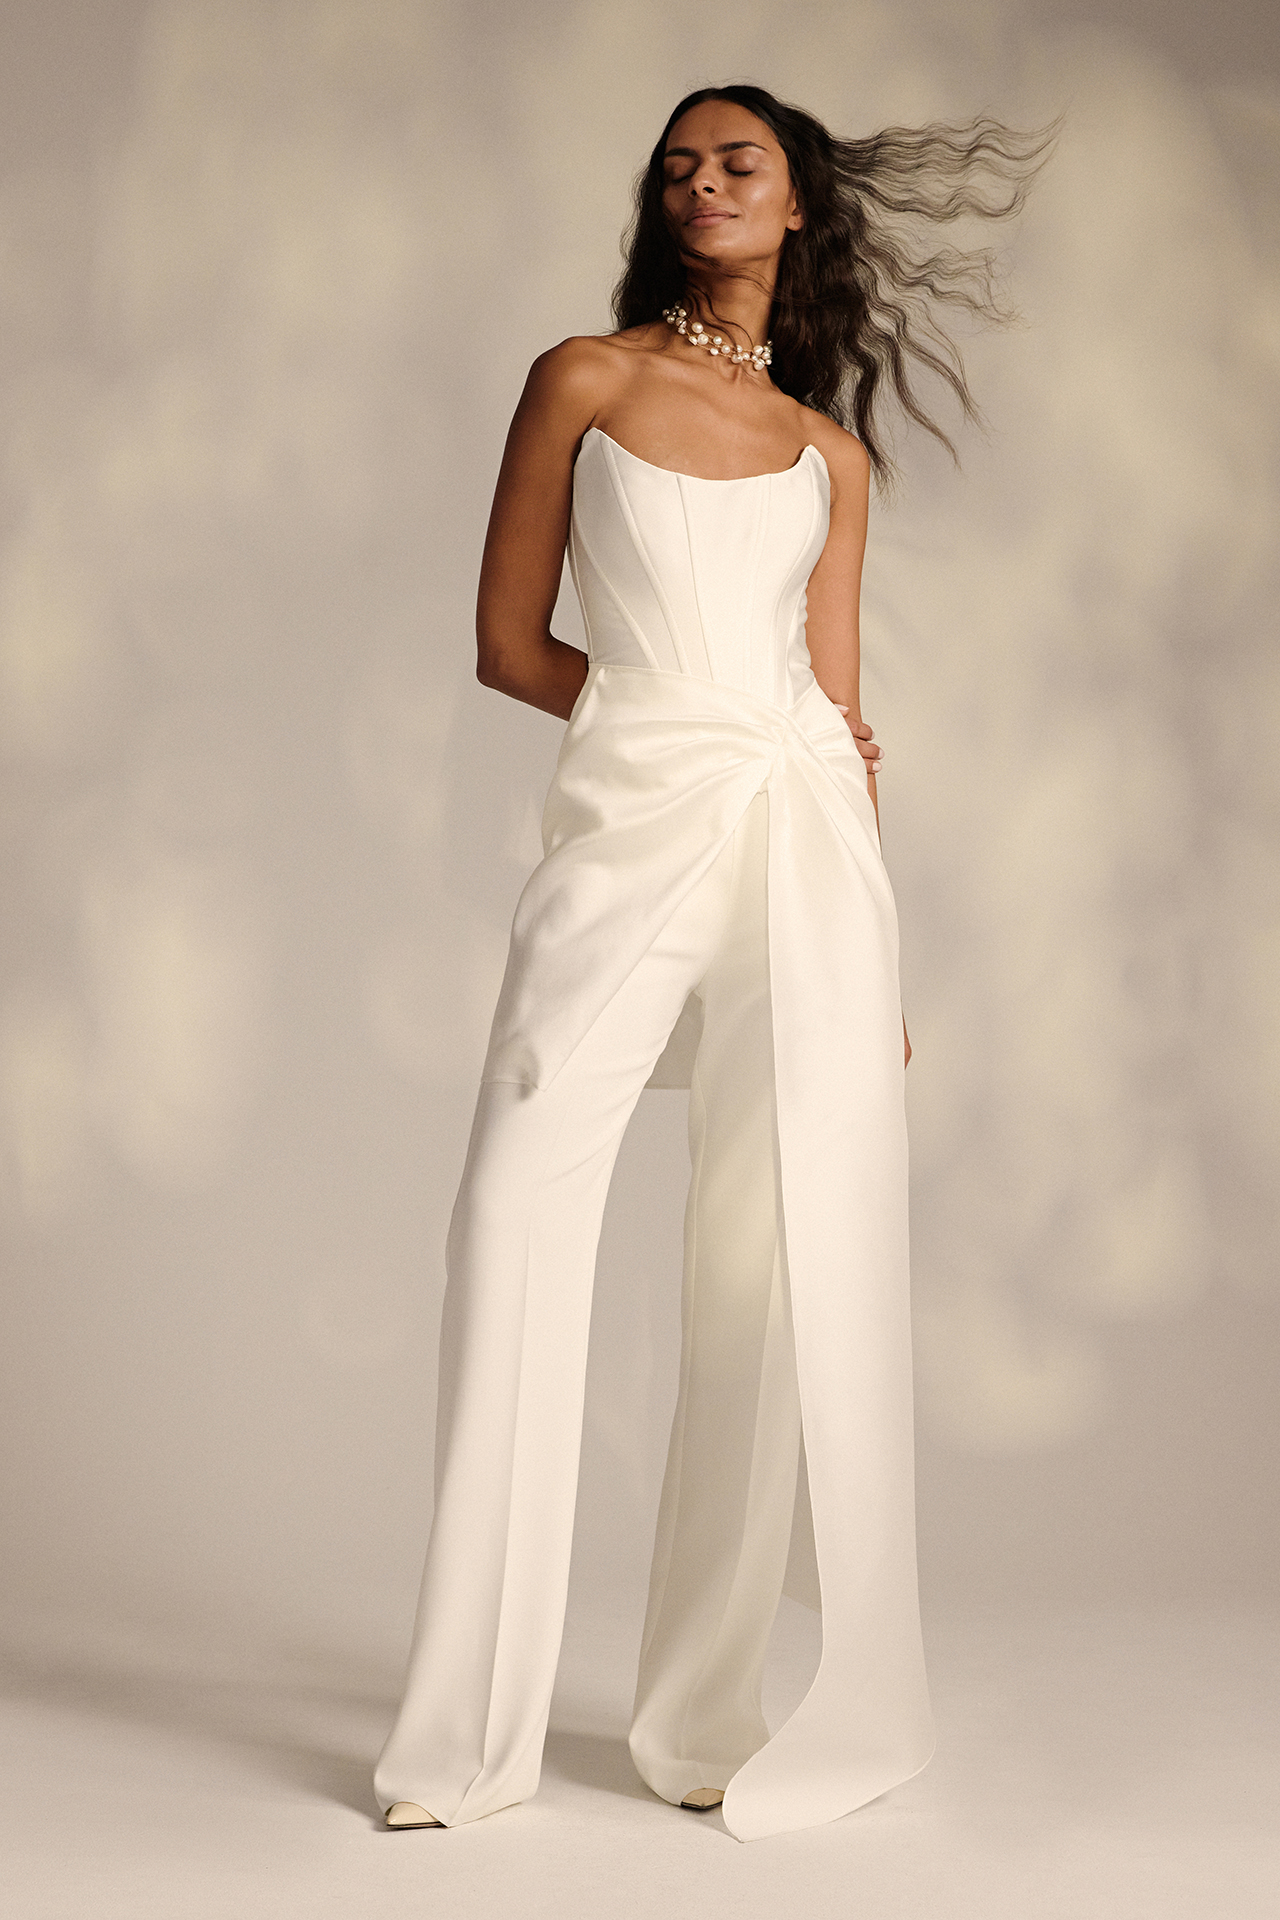 Bride in corsetted pantsuit wedding attire